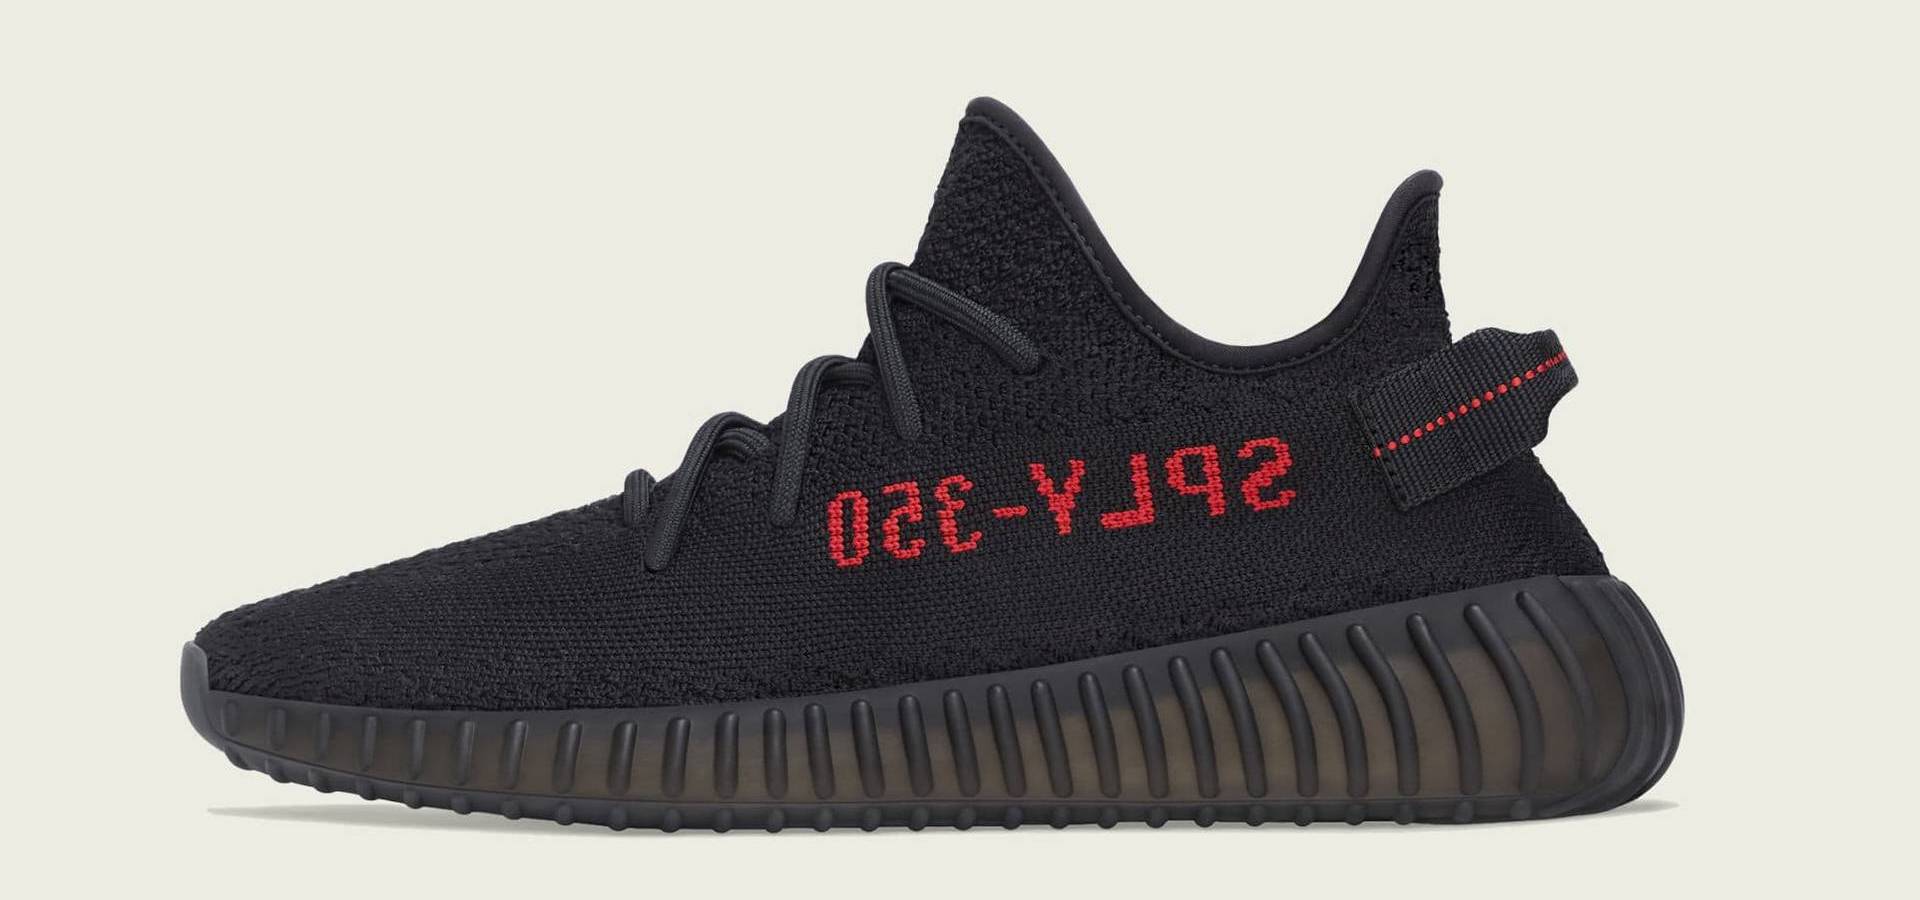 adidas yeezy boost 350 v2 black red cp9652 lateral 1 copie